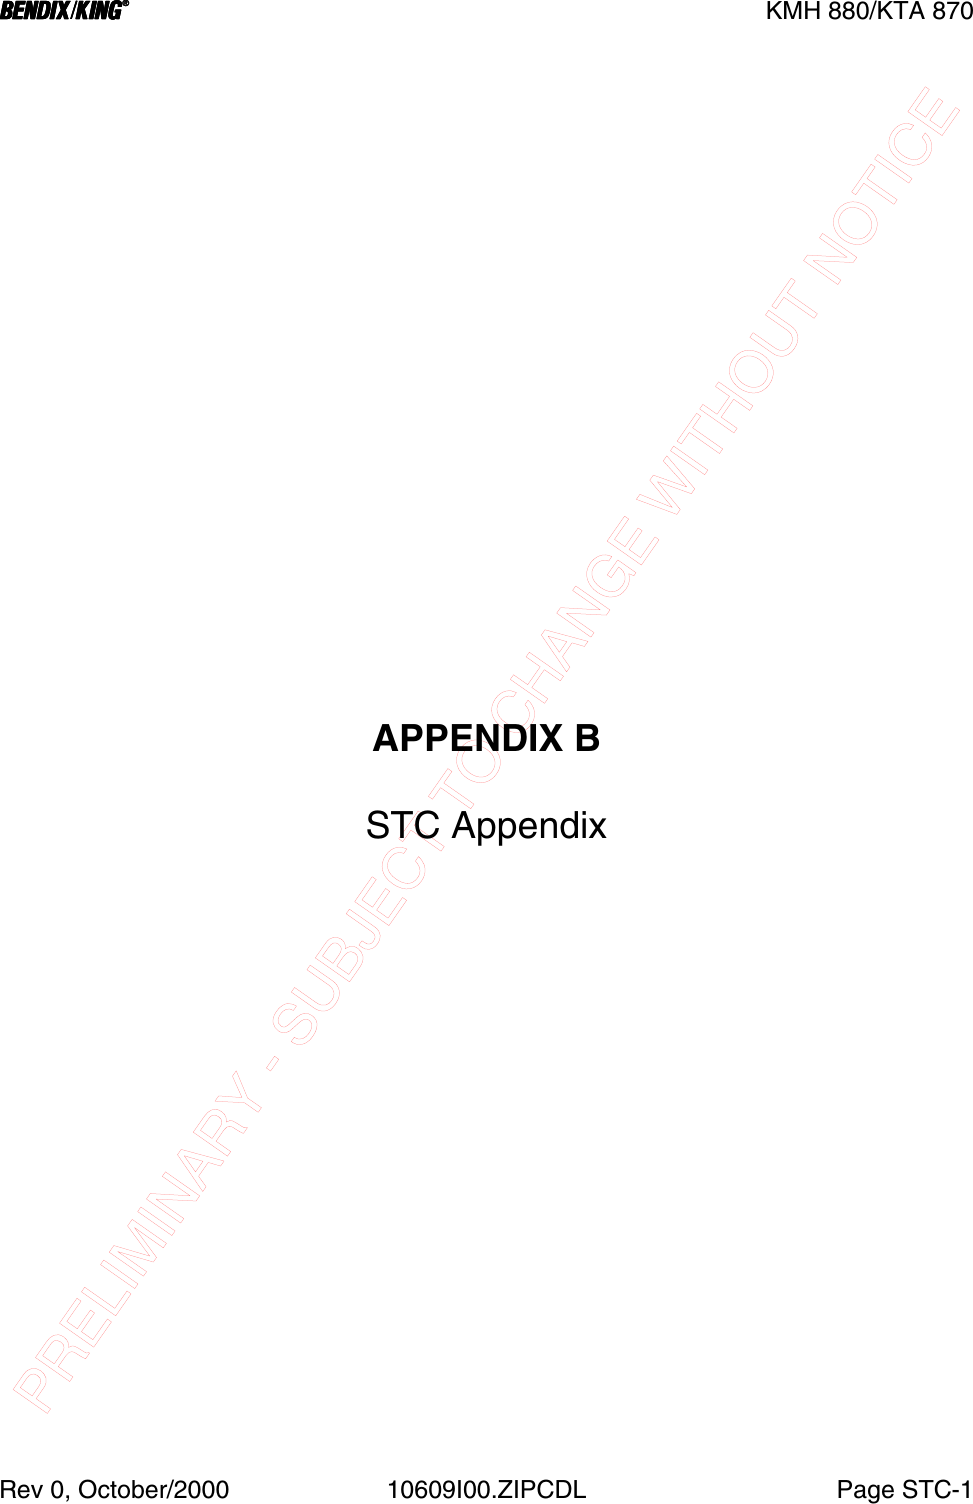 PRELIMINARY - SUBJECT TO CHANGE WITHOUT NOTICEBBBBKMH 880/KTA 870Rev 0, October/2000 10609I00.ZIPCDL Page STC-1APPENDIX BSTC Appendix